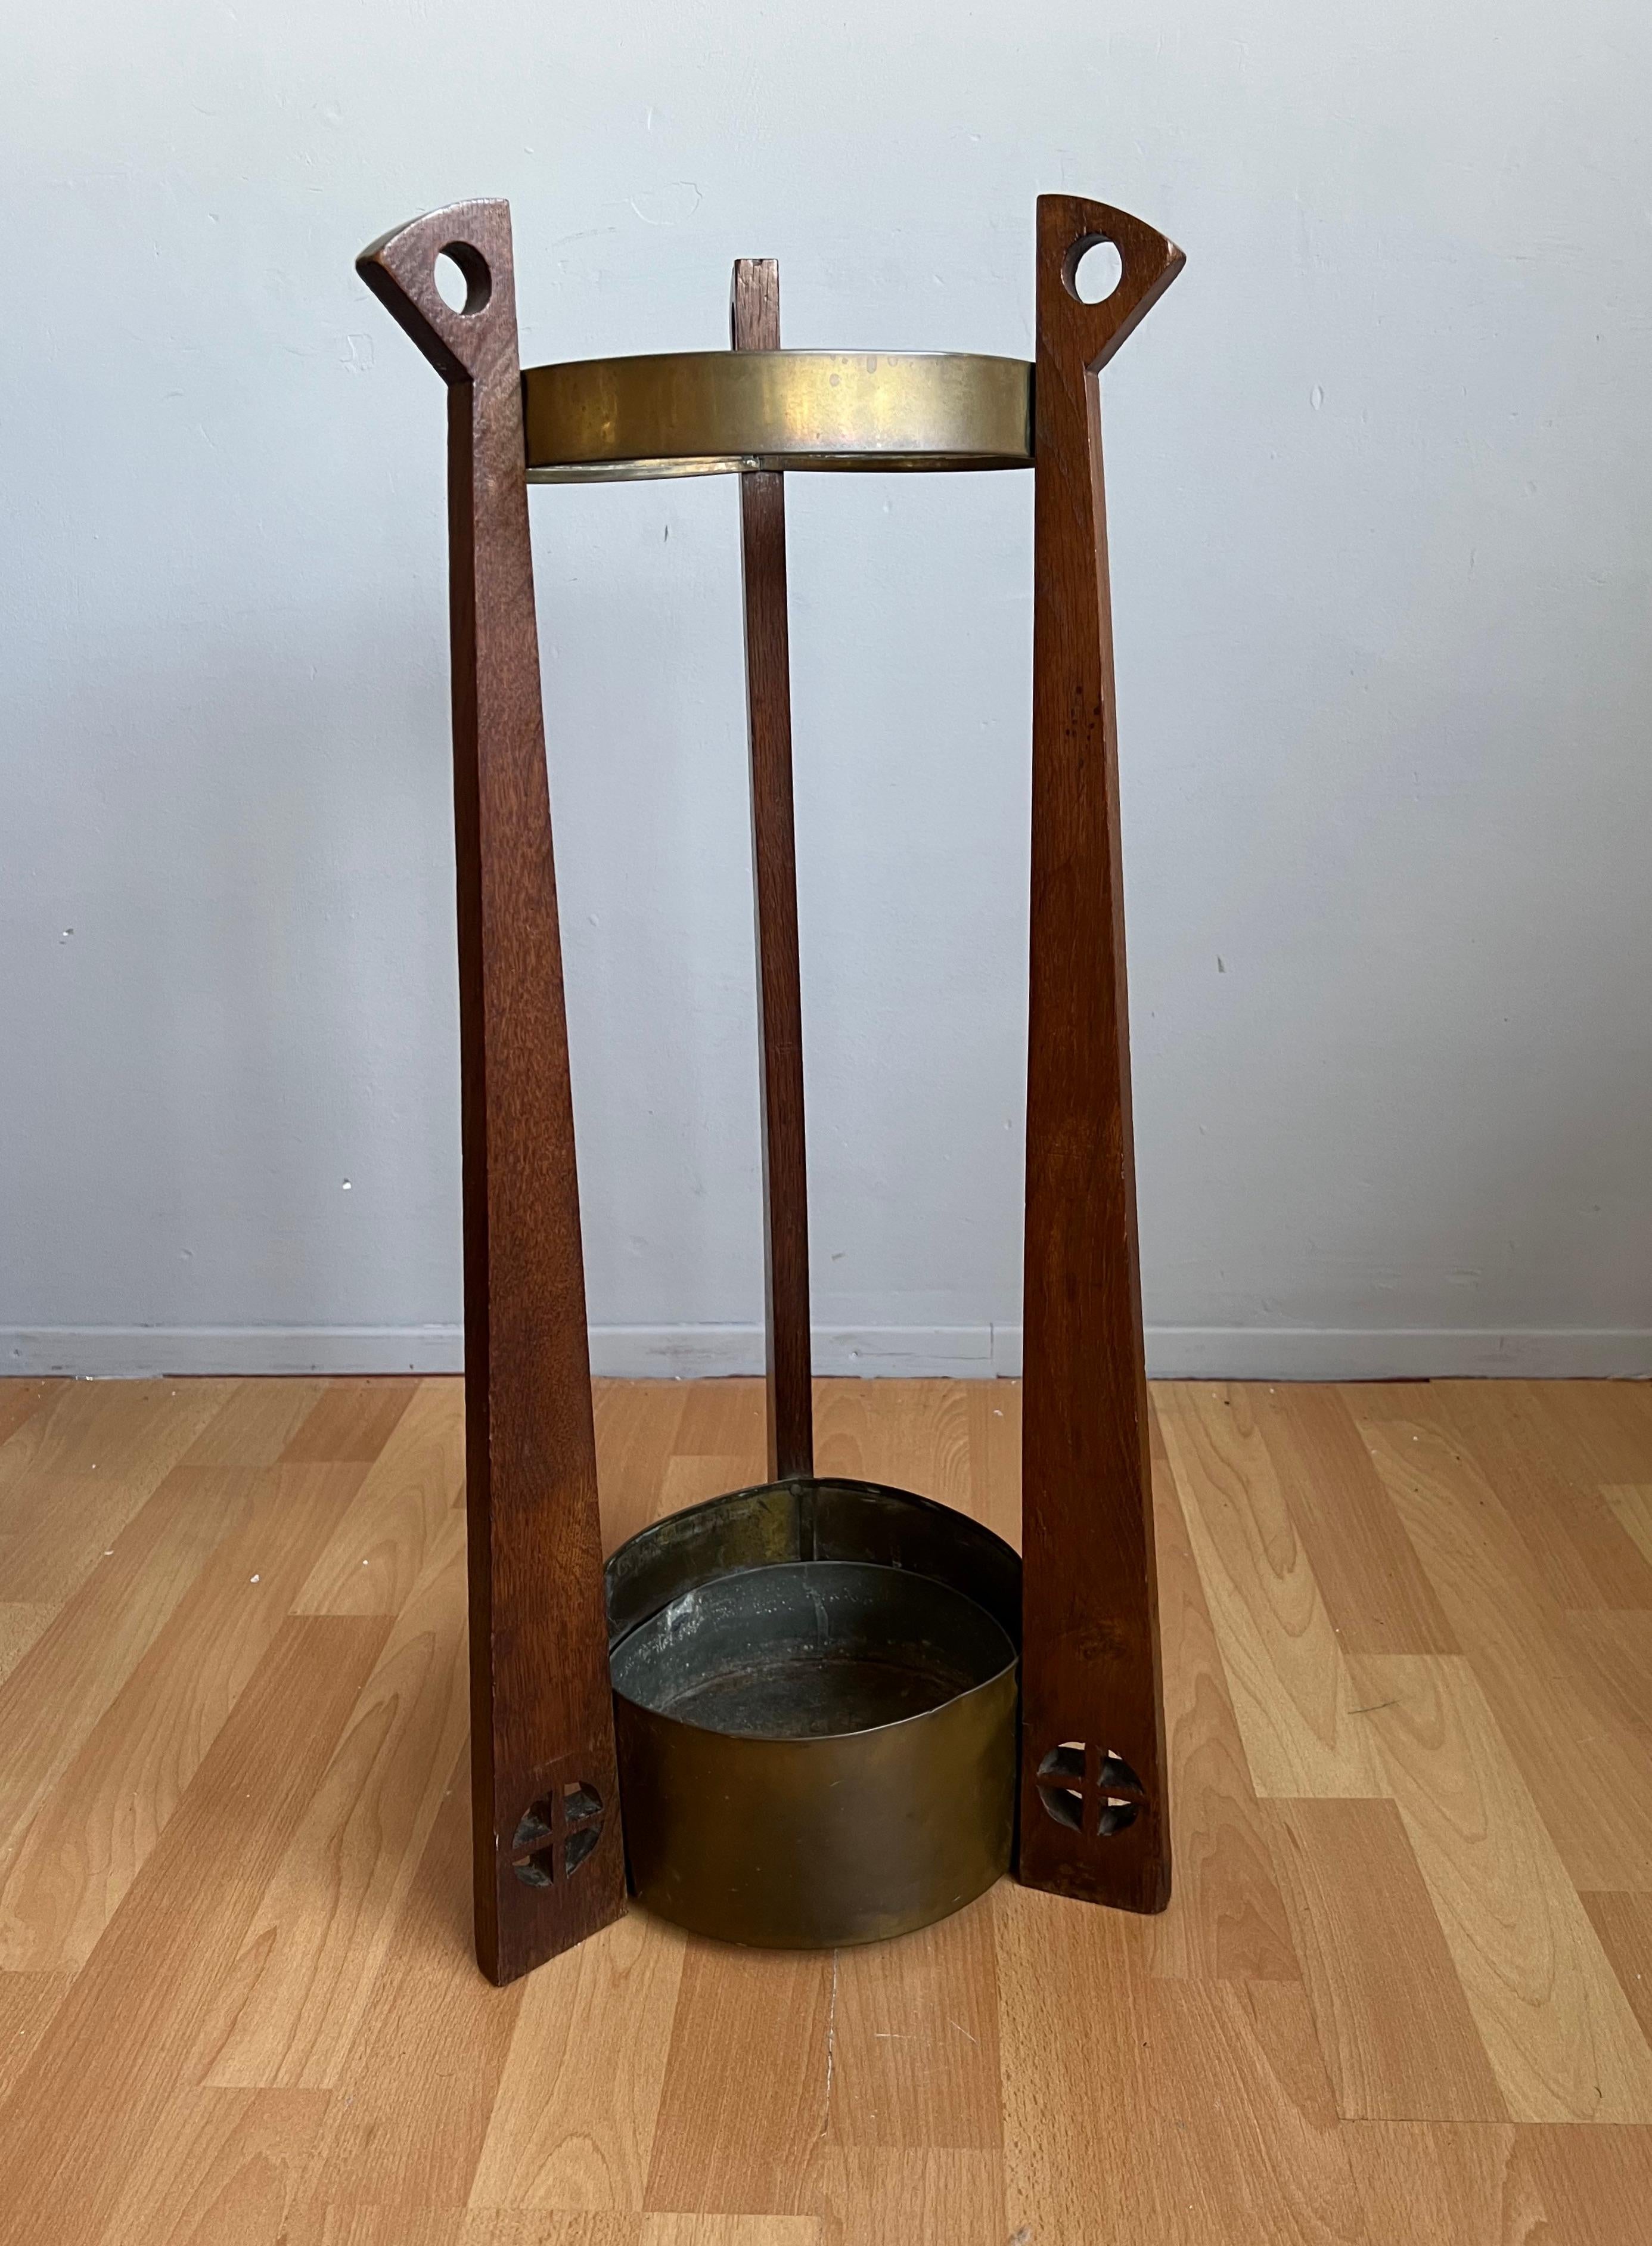 Gustave Serrurier-Bovy Brass and Oak Cane & Umbrella Stand with Zinc Liner For Sale 6